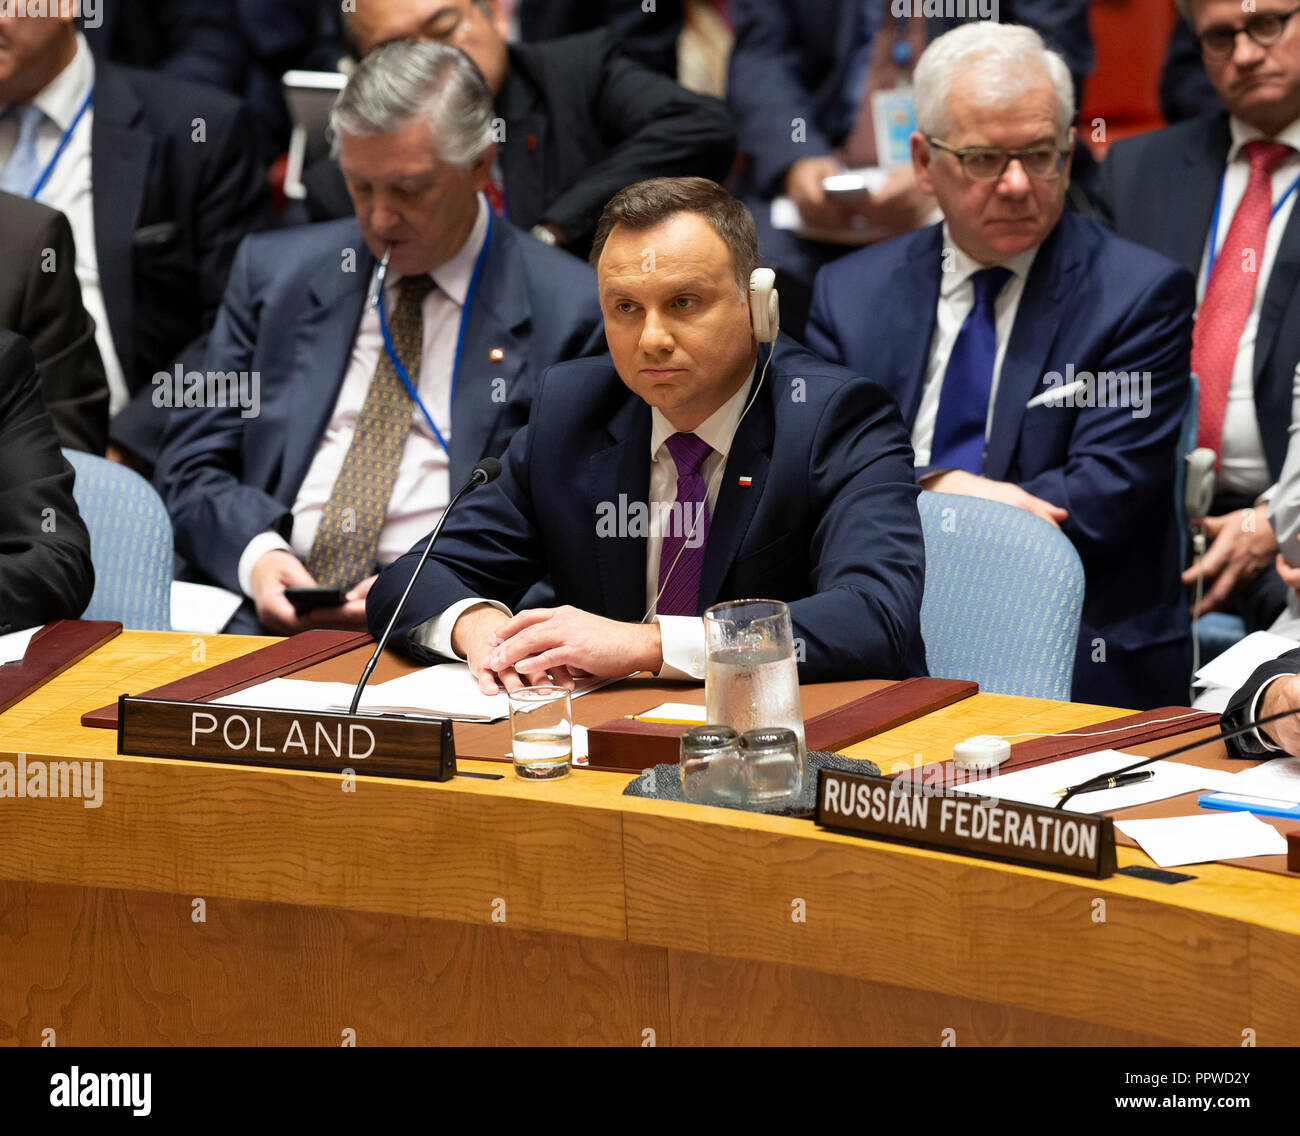 New York, United States. 26th Sep, 2018. Poland President Andrzej Duda attends Security Council meeting on Non-proliferation of Weapons of Mass Destruction presided by President of US Donald Trump at United Nations Headquarters Credit: Ajun Ally/Pacific Press/Alamy Live News Stock Photo